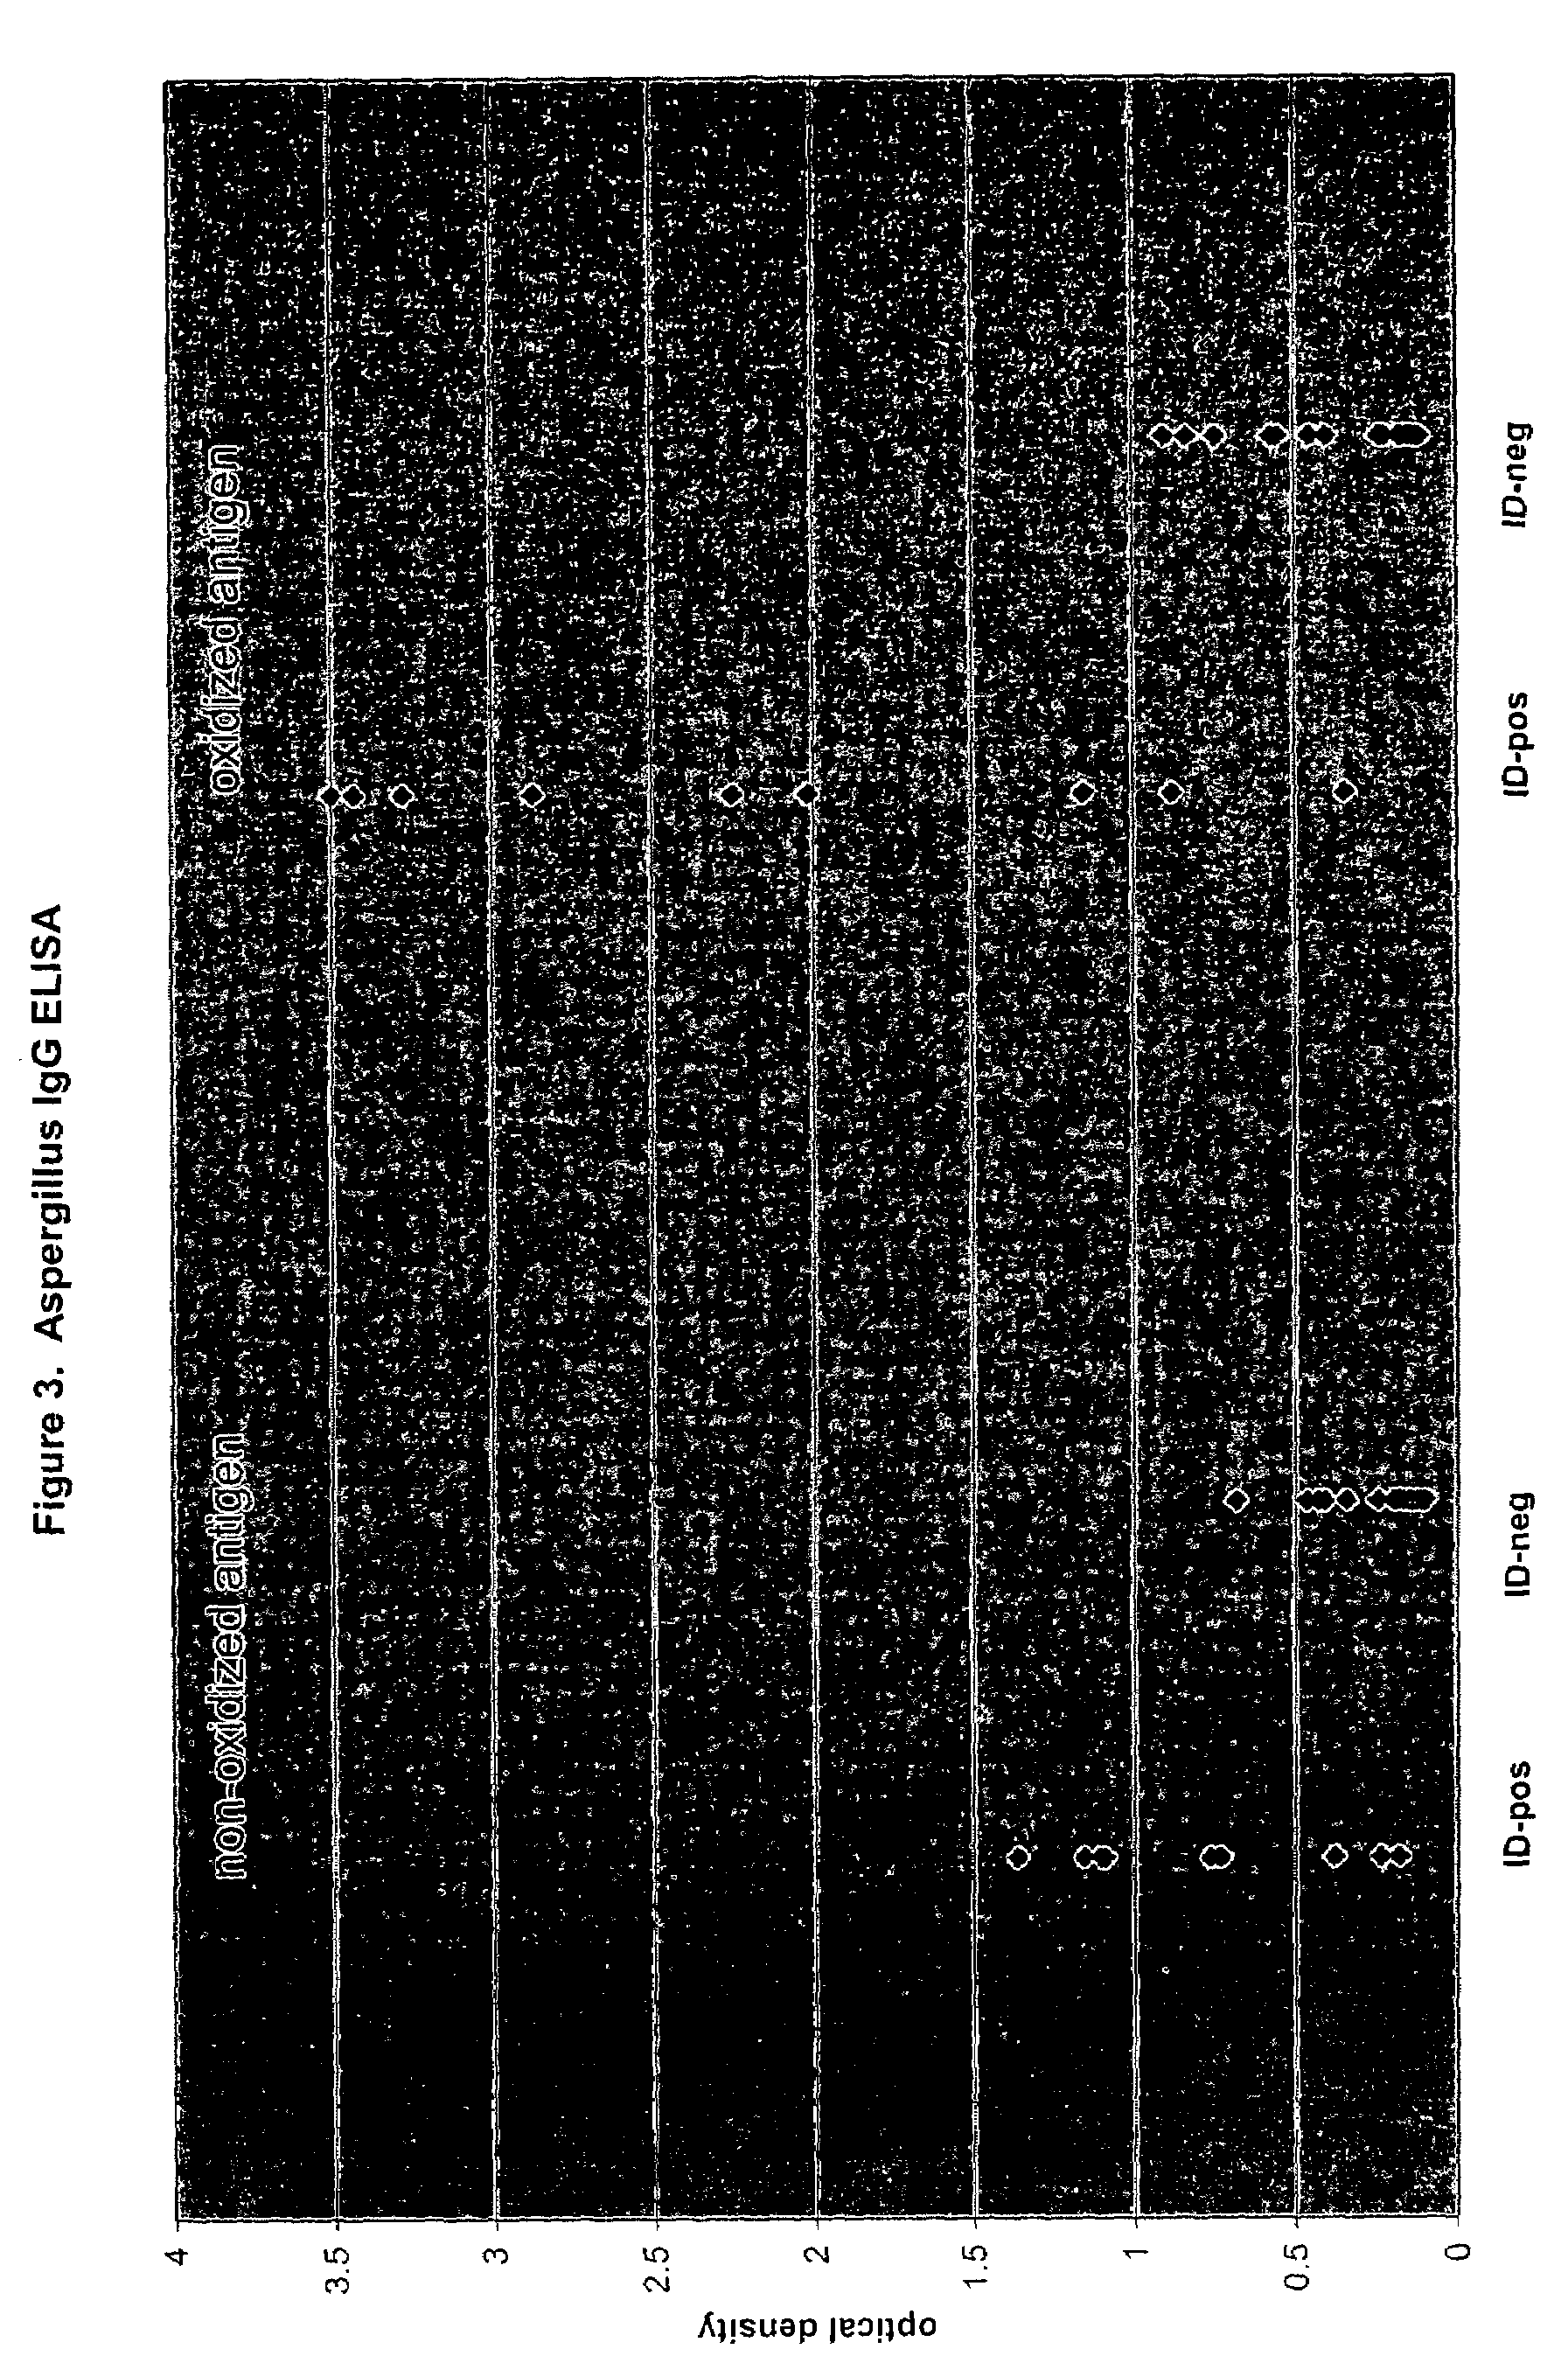 Oxidized fungal antigens and methods of making and using thereof